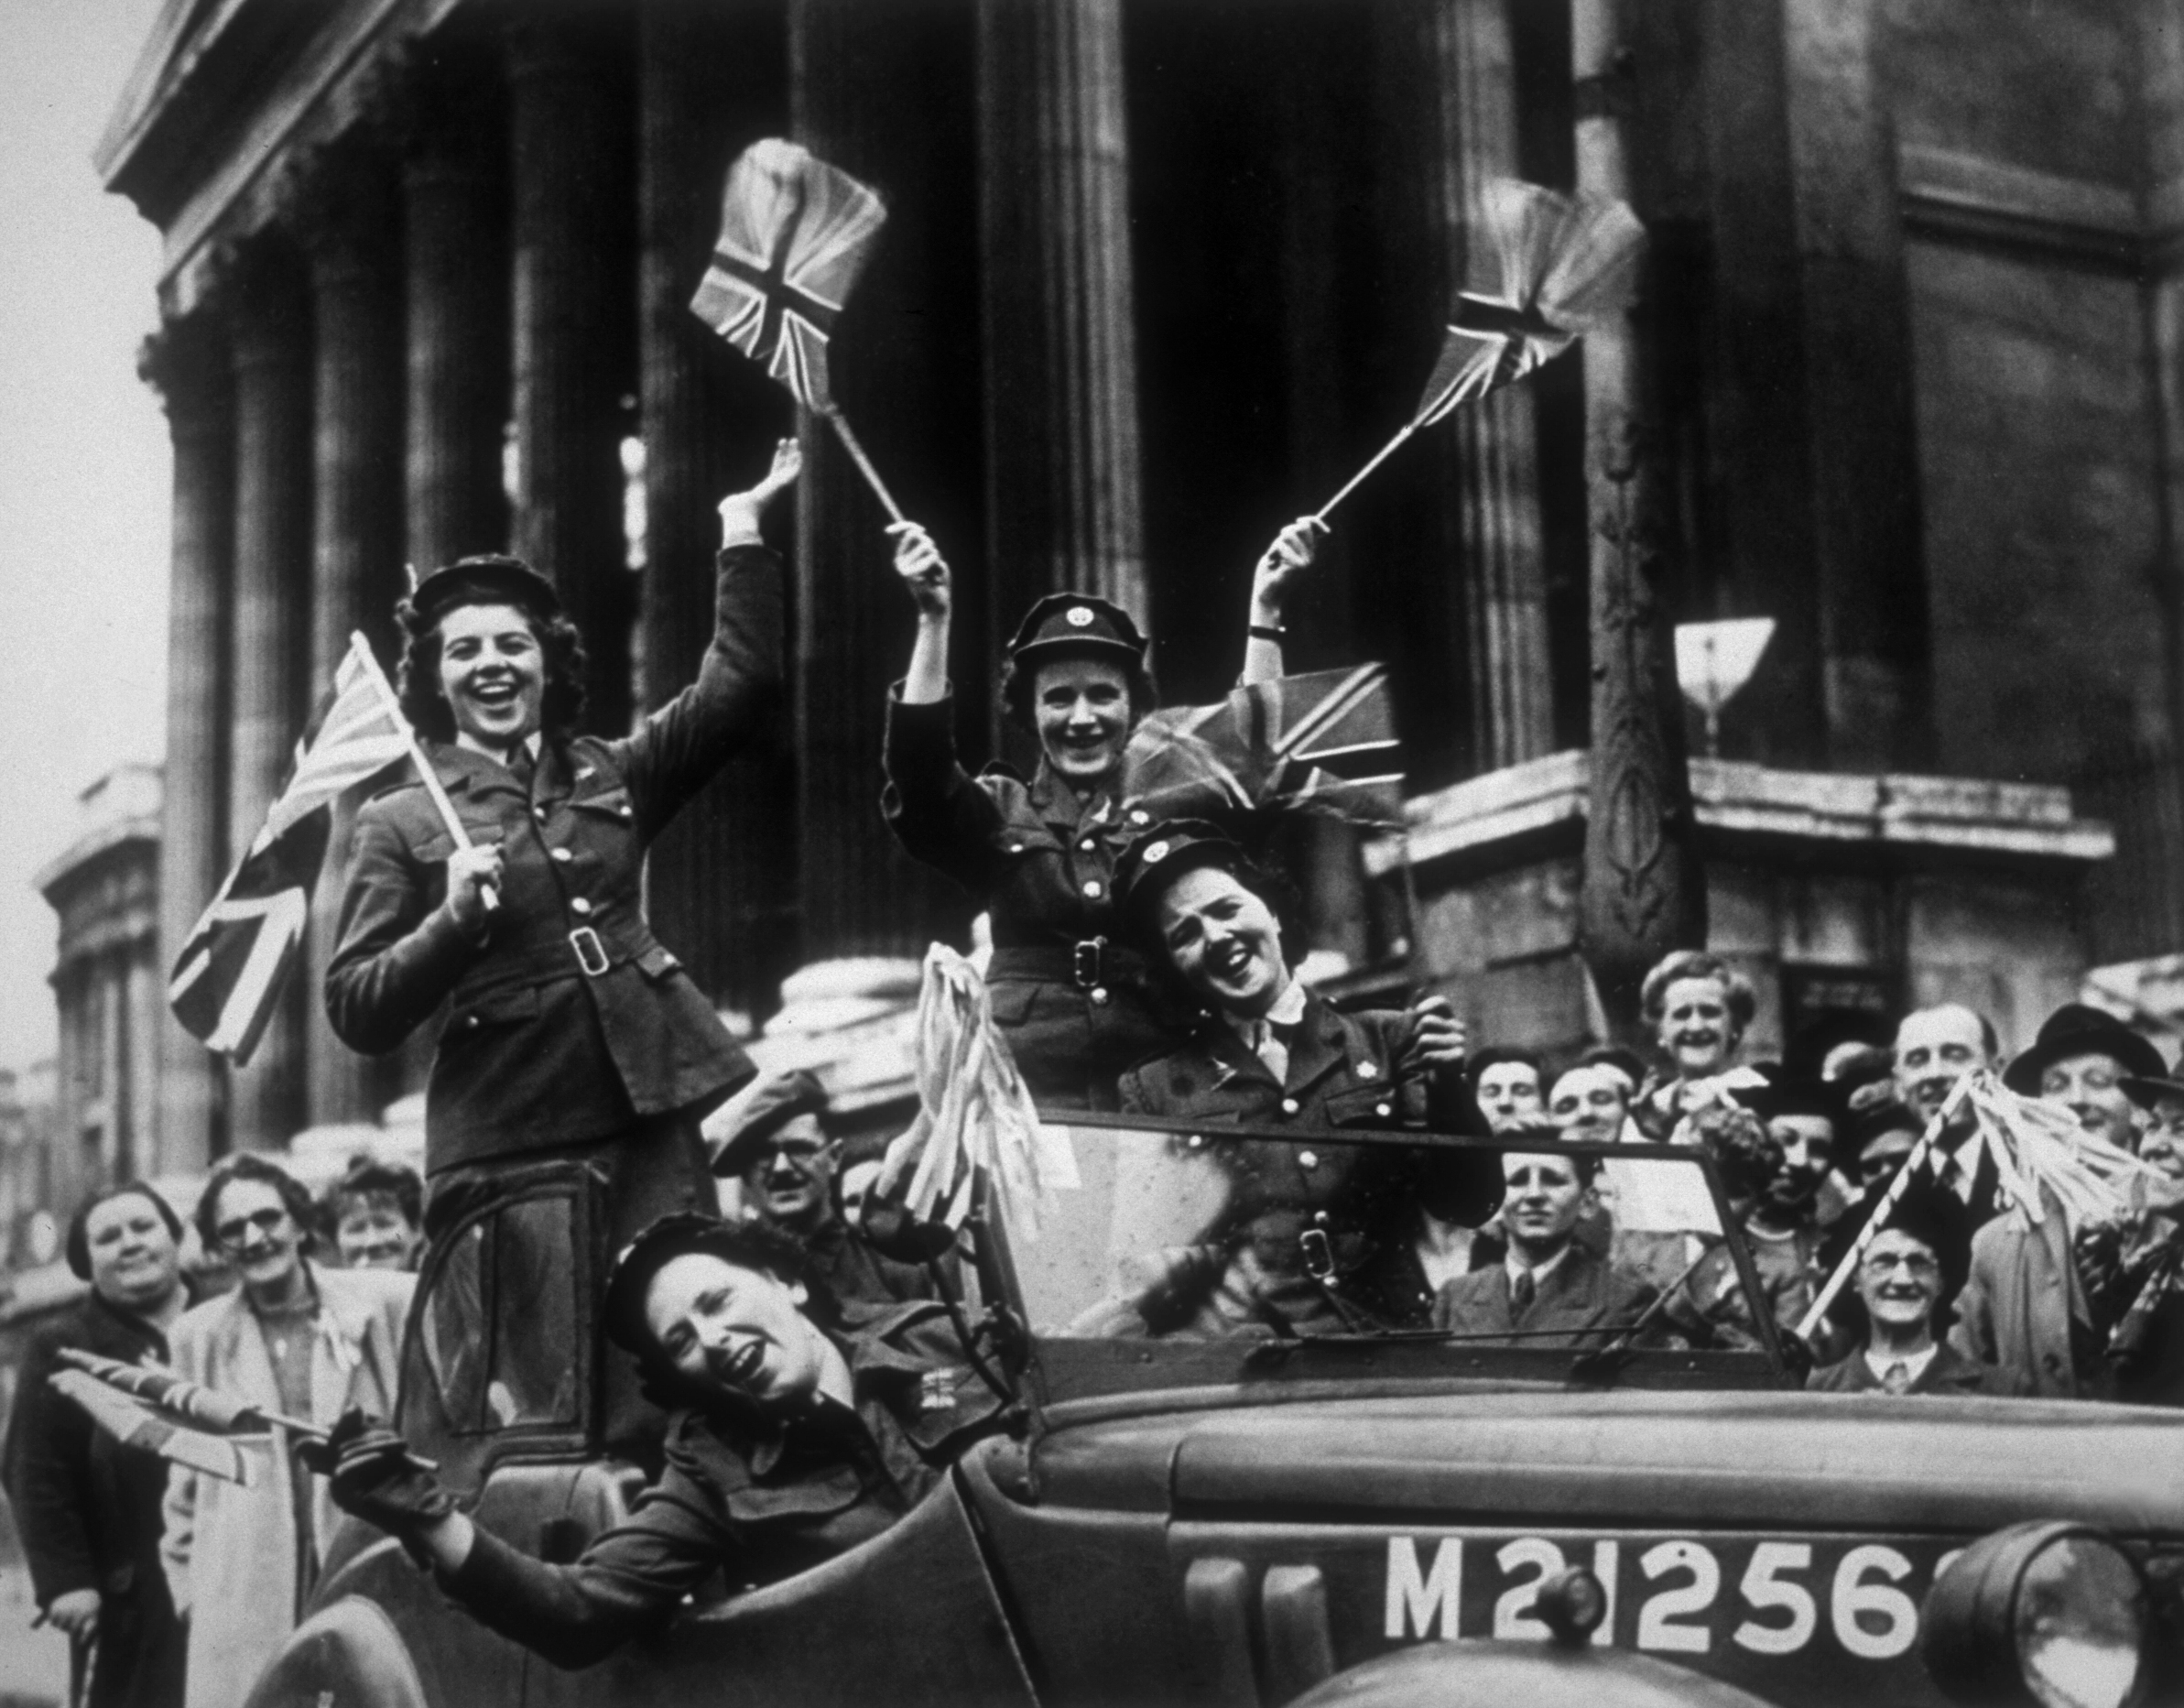 An old photograph of women in uniform in a car waving UK flags and smiling